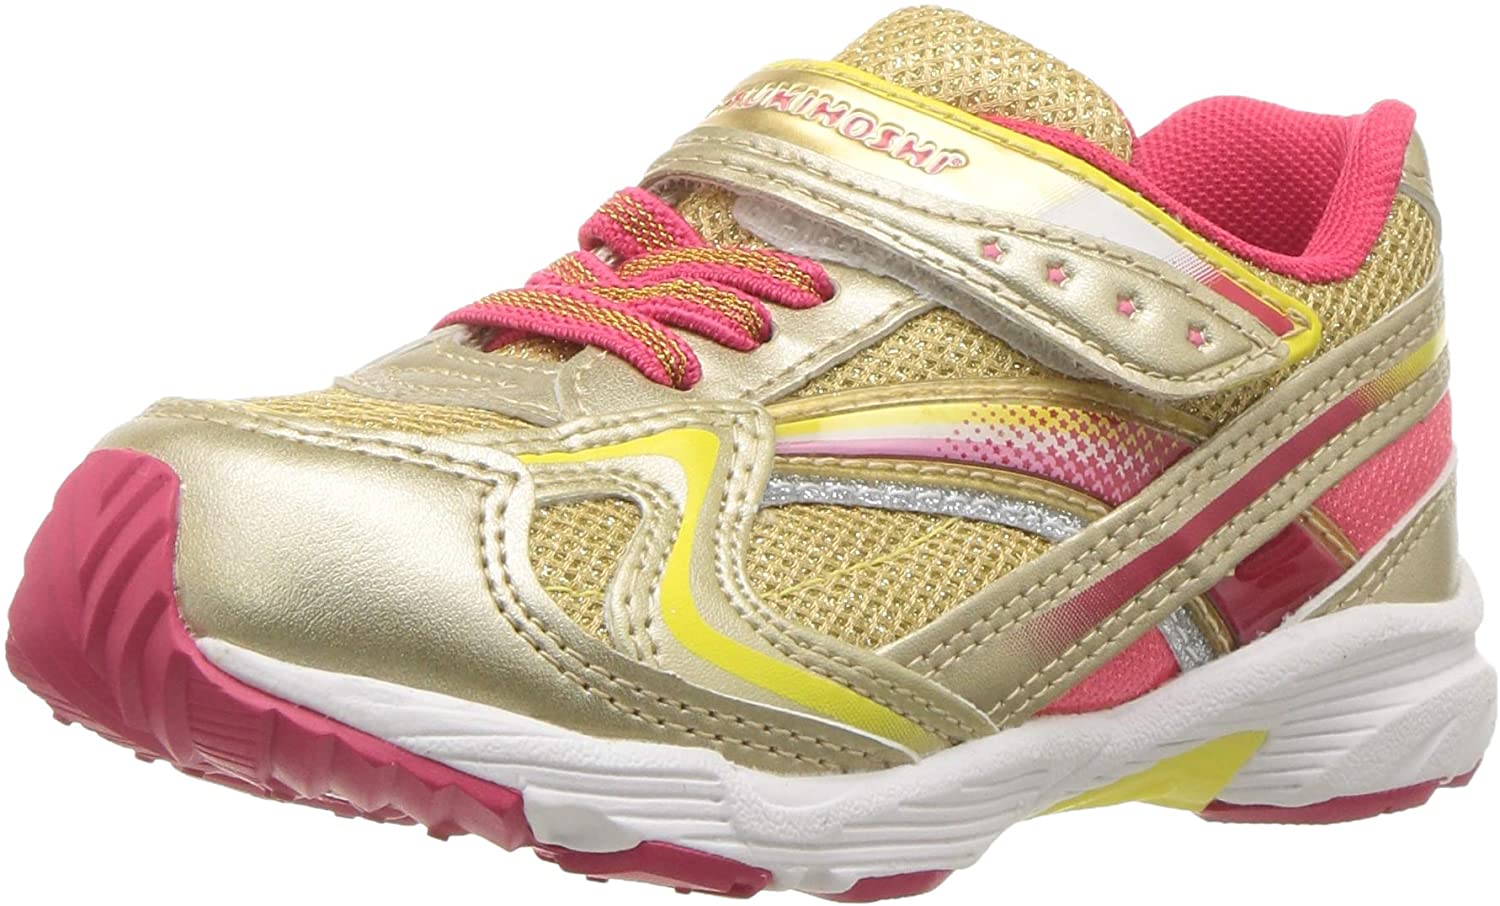 Baby Tsukihoshi Glitz Sneaker in Gold/Coral from the front view